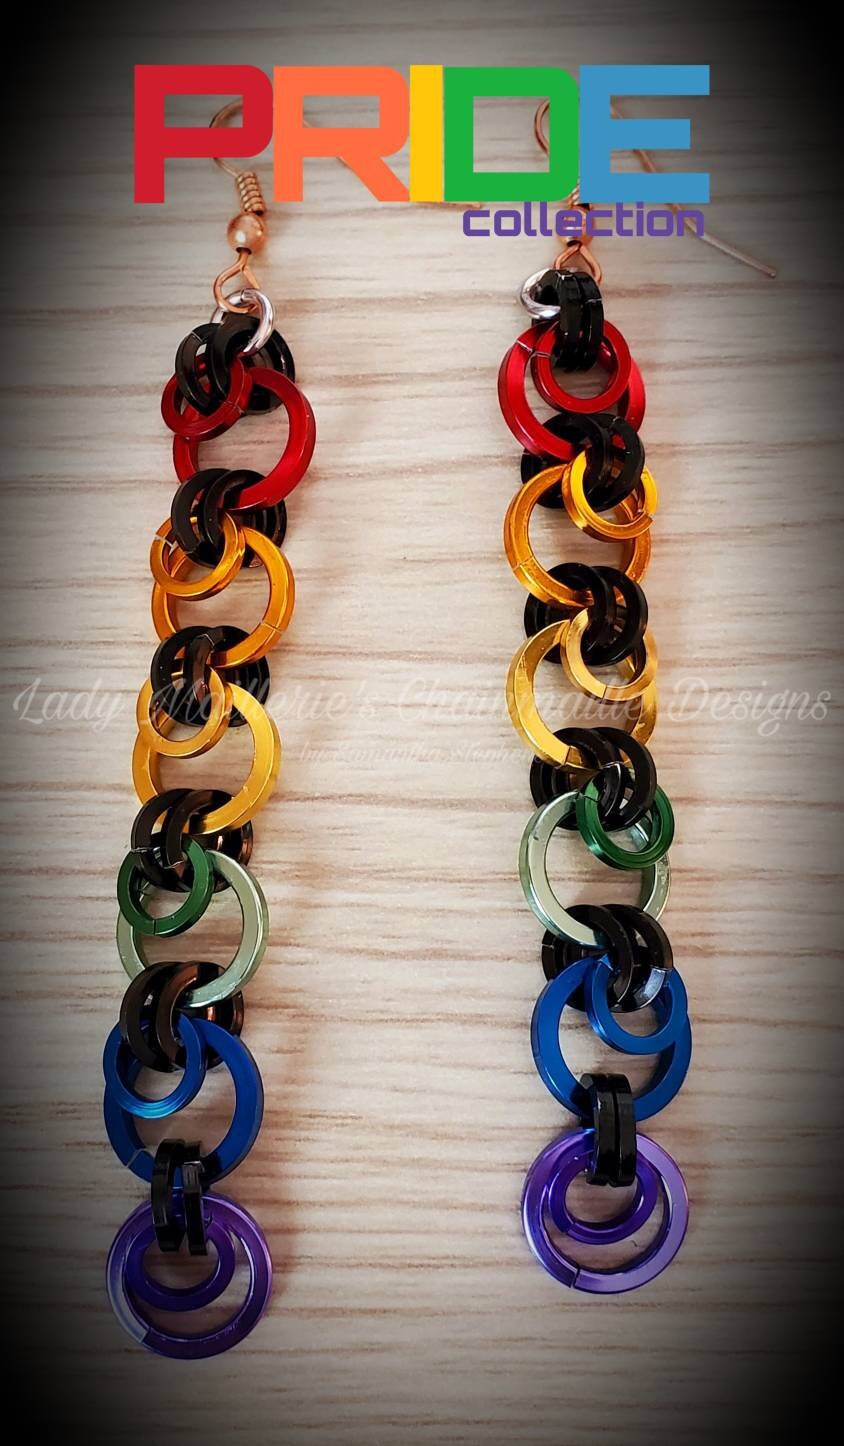 PRIDEcollection Rainbow Ring Dangles (square wire)